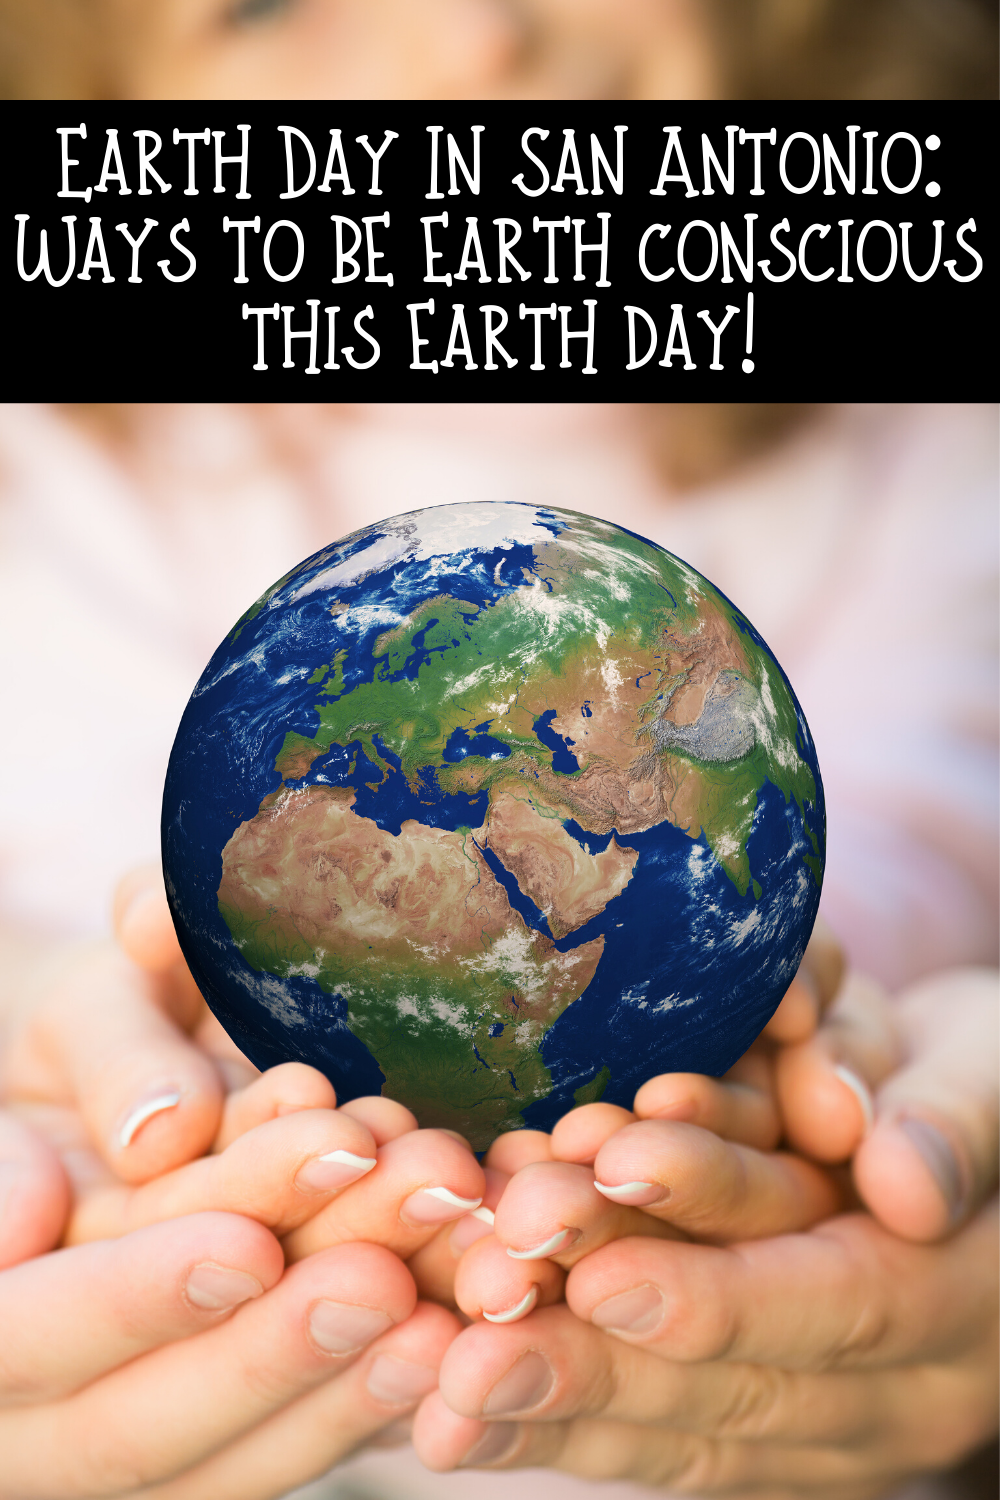 Earth Day in San Antonio might look a little different this year. If you can't get out and volunteer in San Antonio to celebrate earth day, here are some ways you can make a difference at home! 